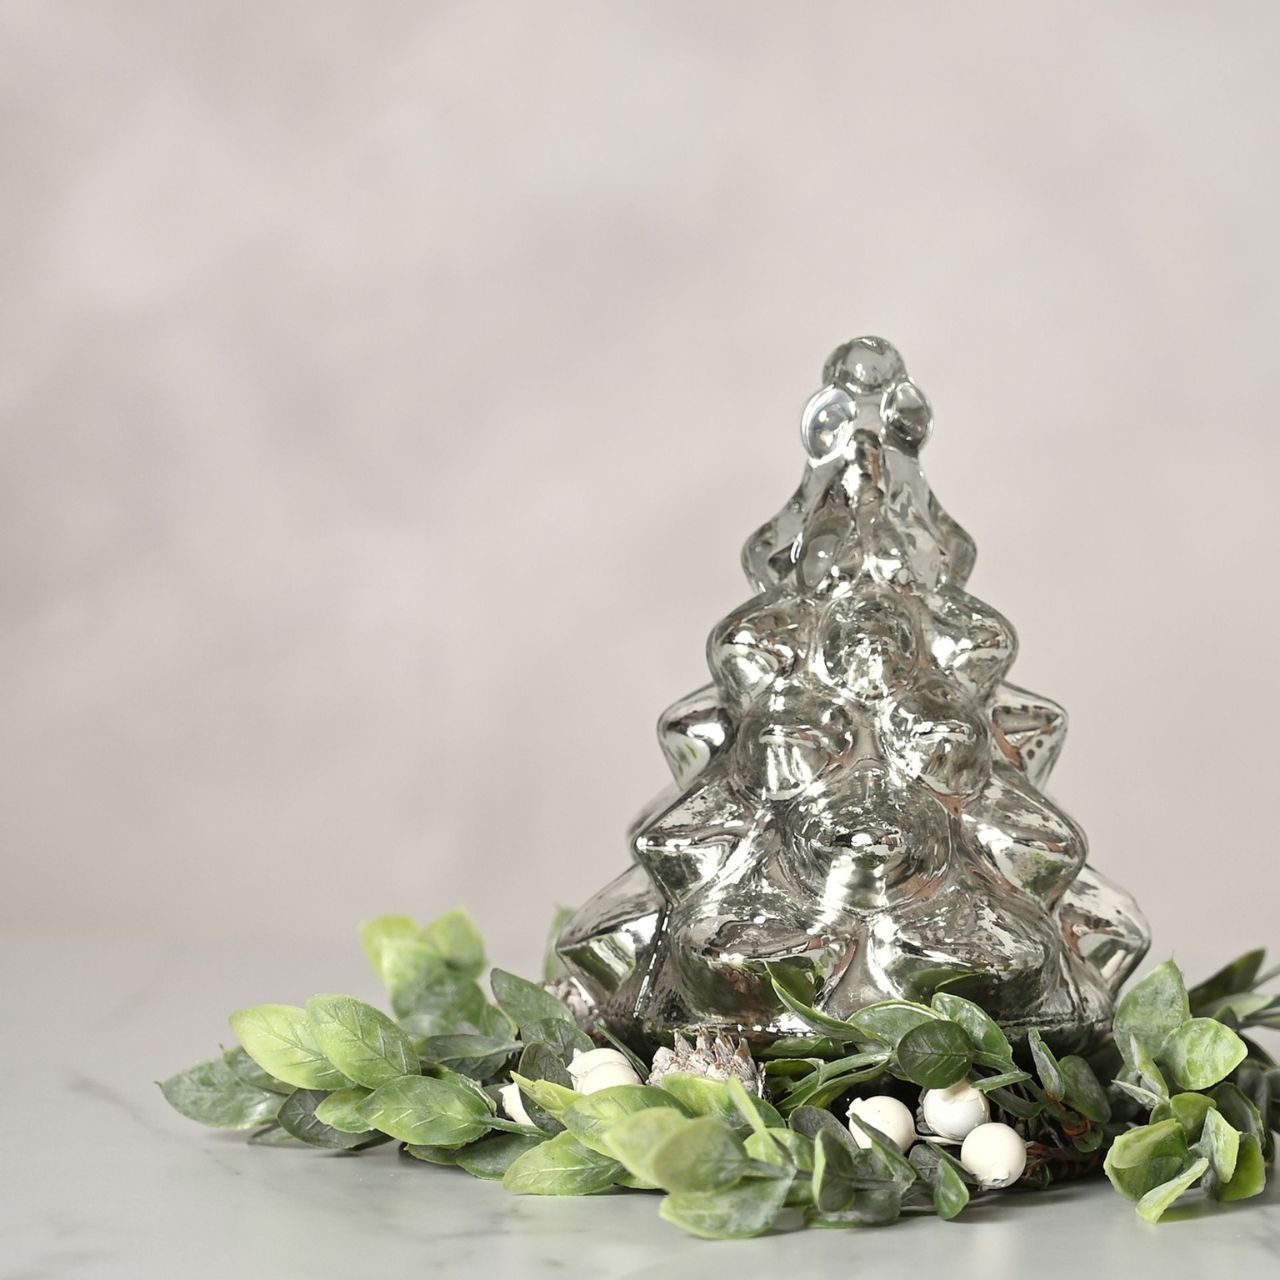 Recycled Glass Silver Christmas Tree Ornament  A recycled glass silver Christmas tree ornament from THE SEASONAL GIFT CO.  This affectionately designed ornament makes a delightful addition to homes during the festive period.